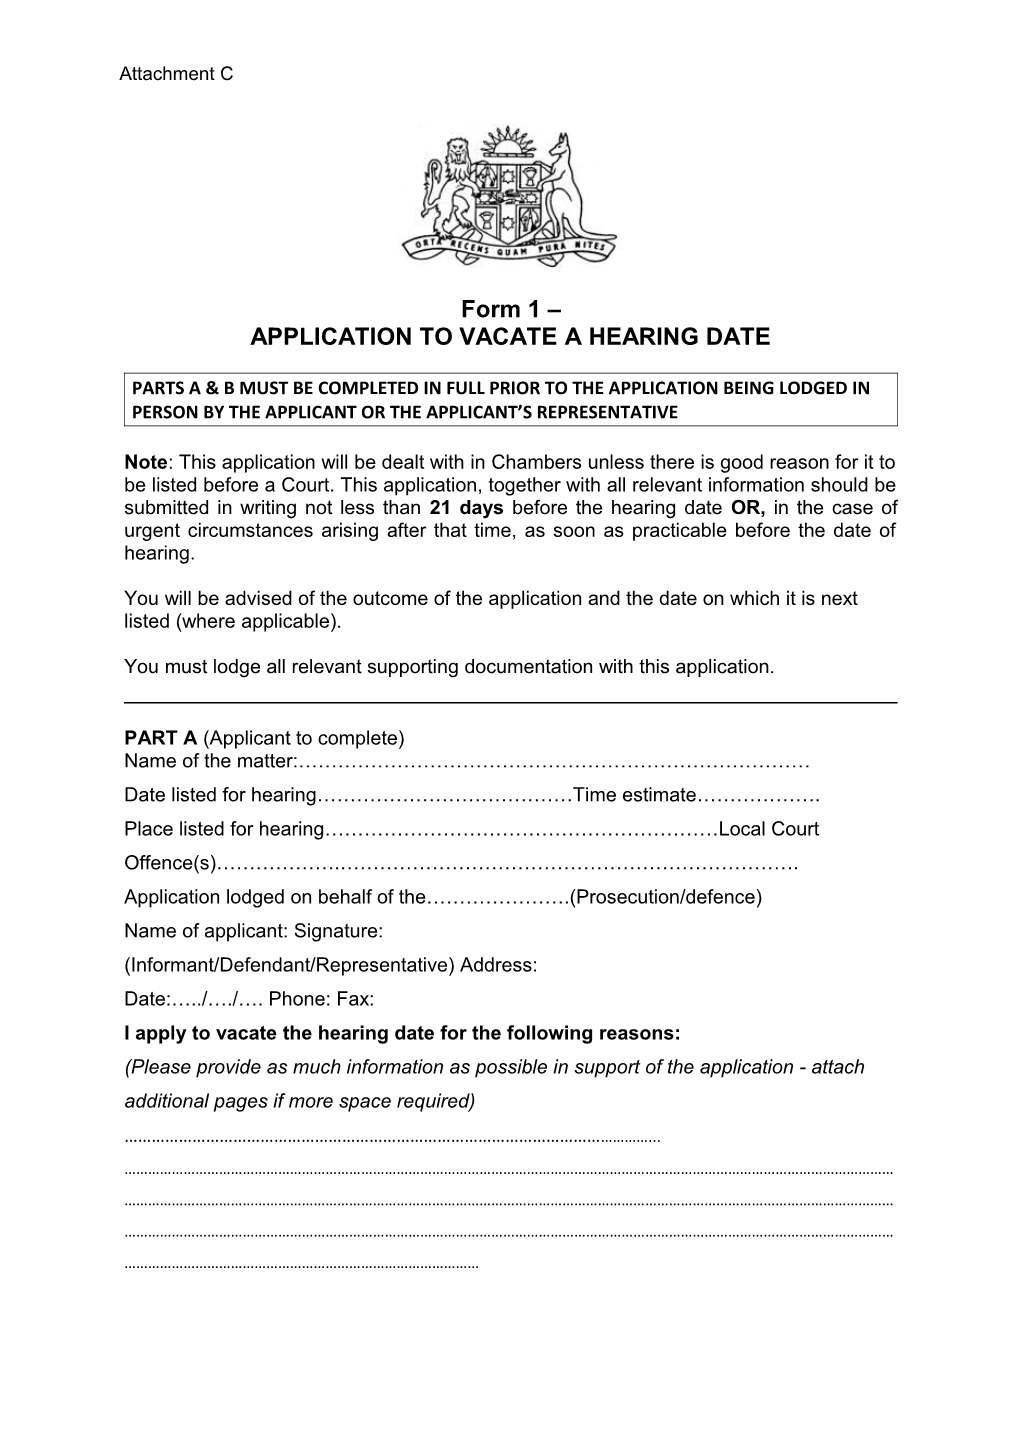 Application to Vacate Hearing Annexure C Crim 1 Practice Note